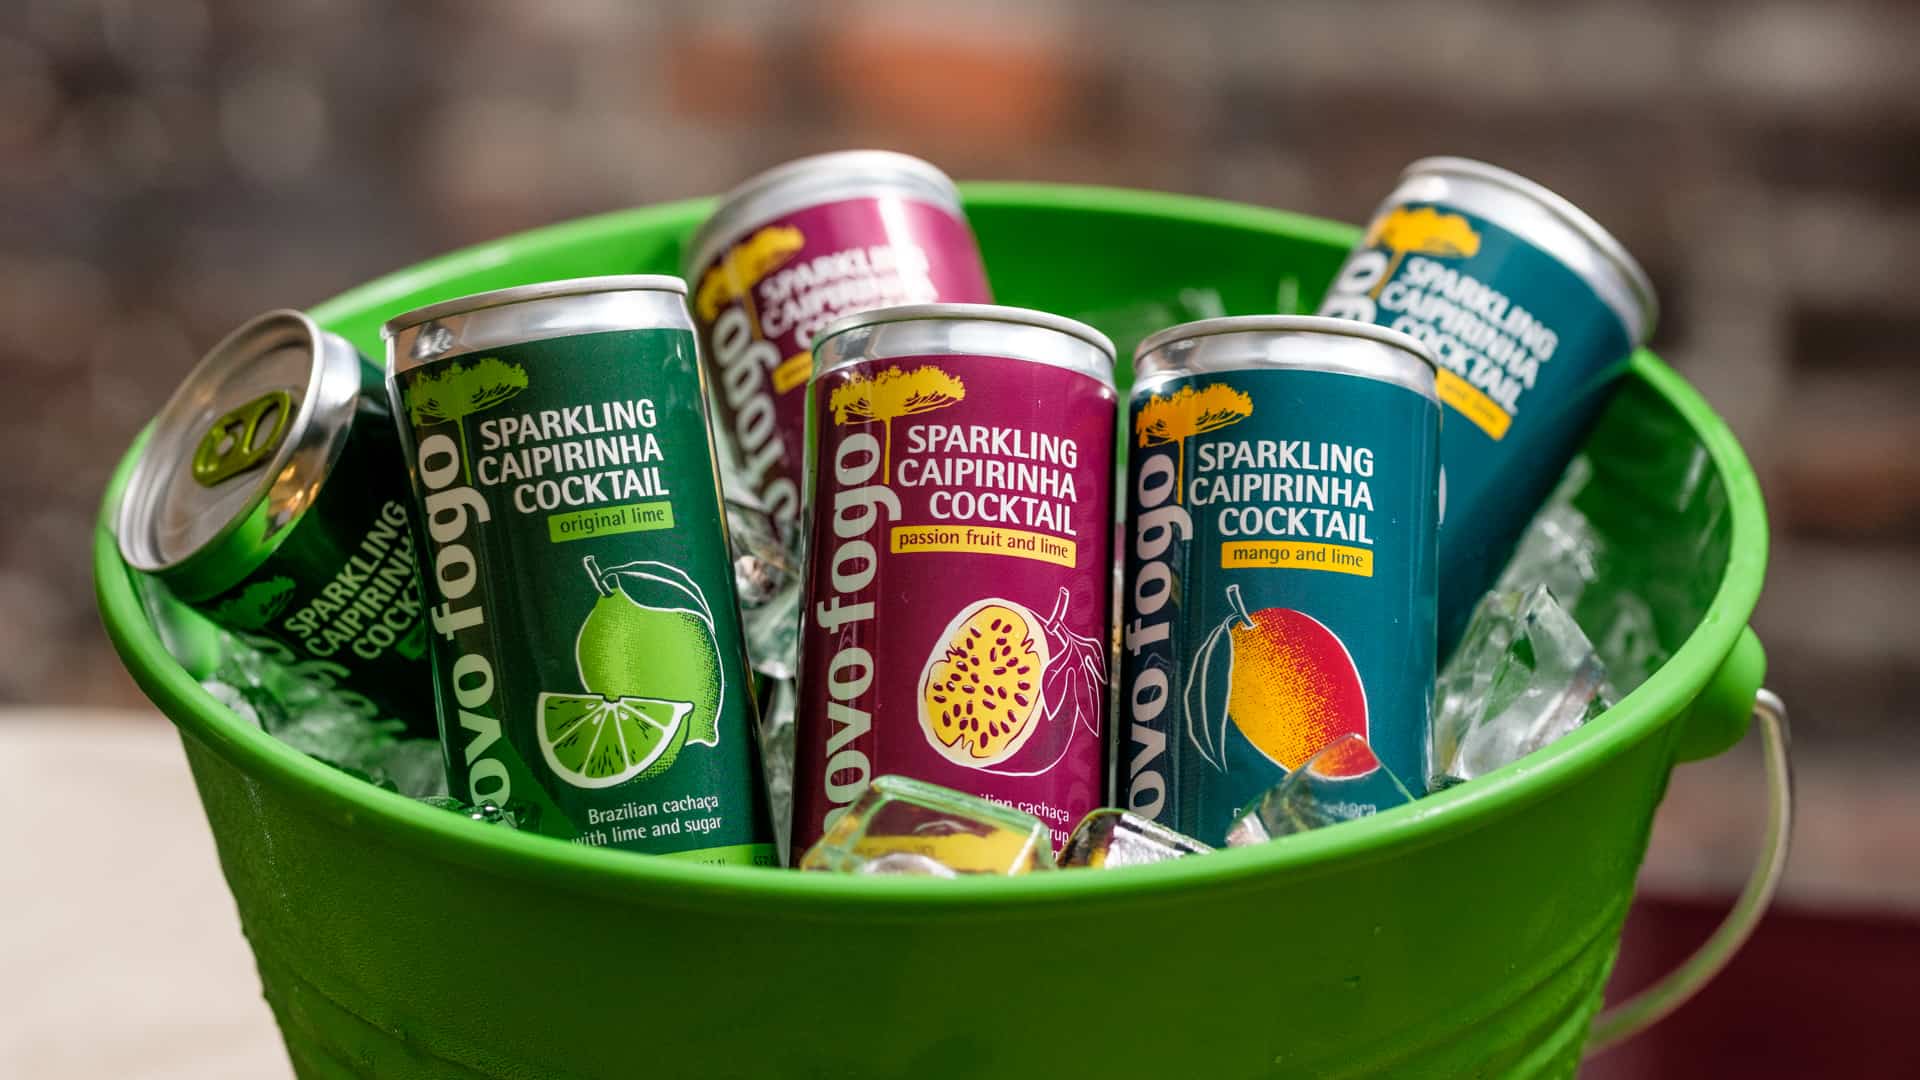 » The Best New Canned Alcoholic Drinks of 2020